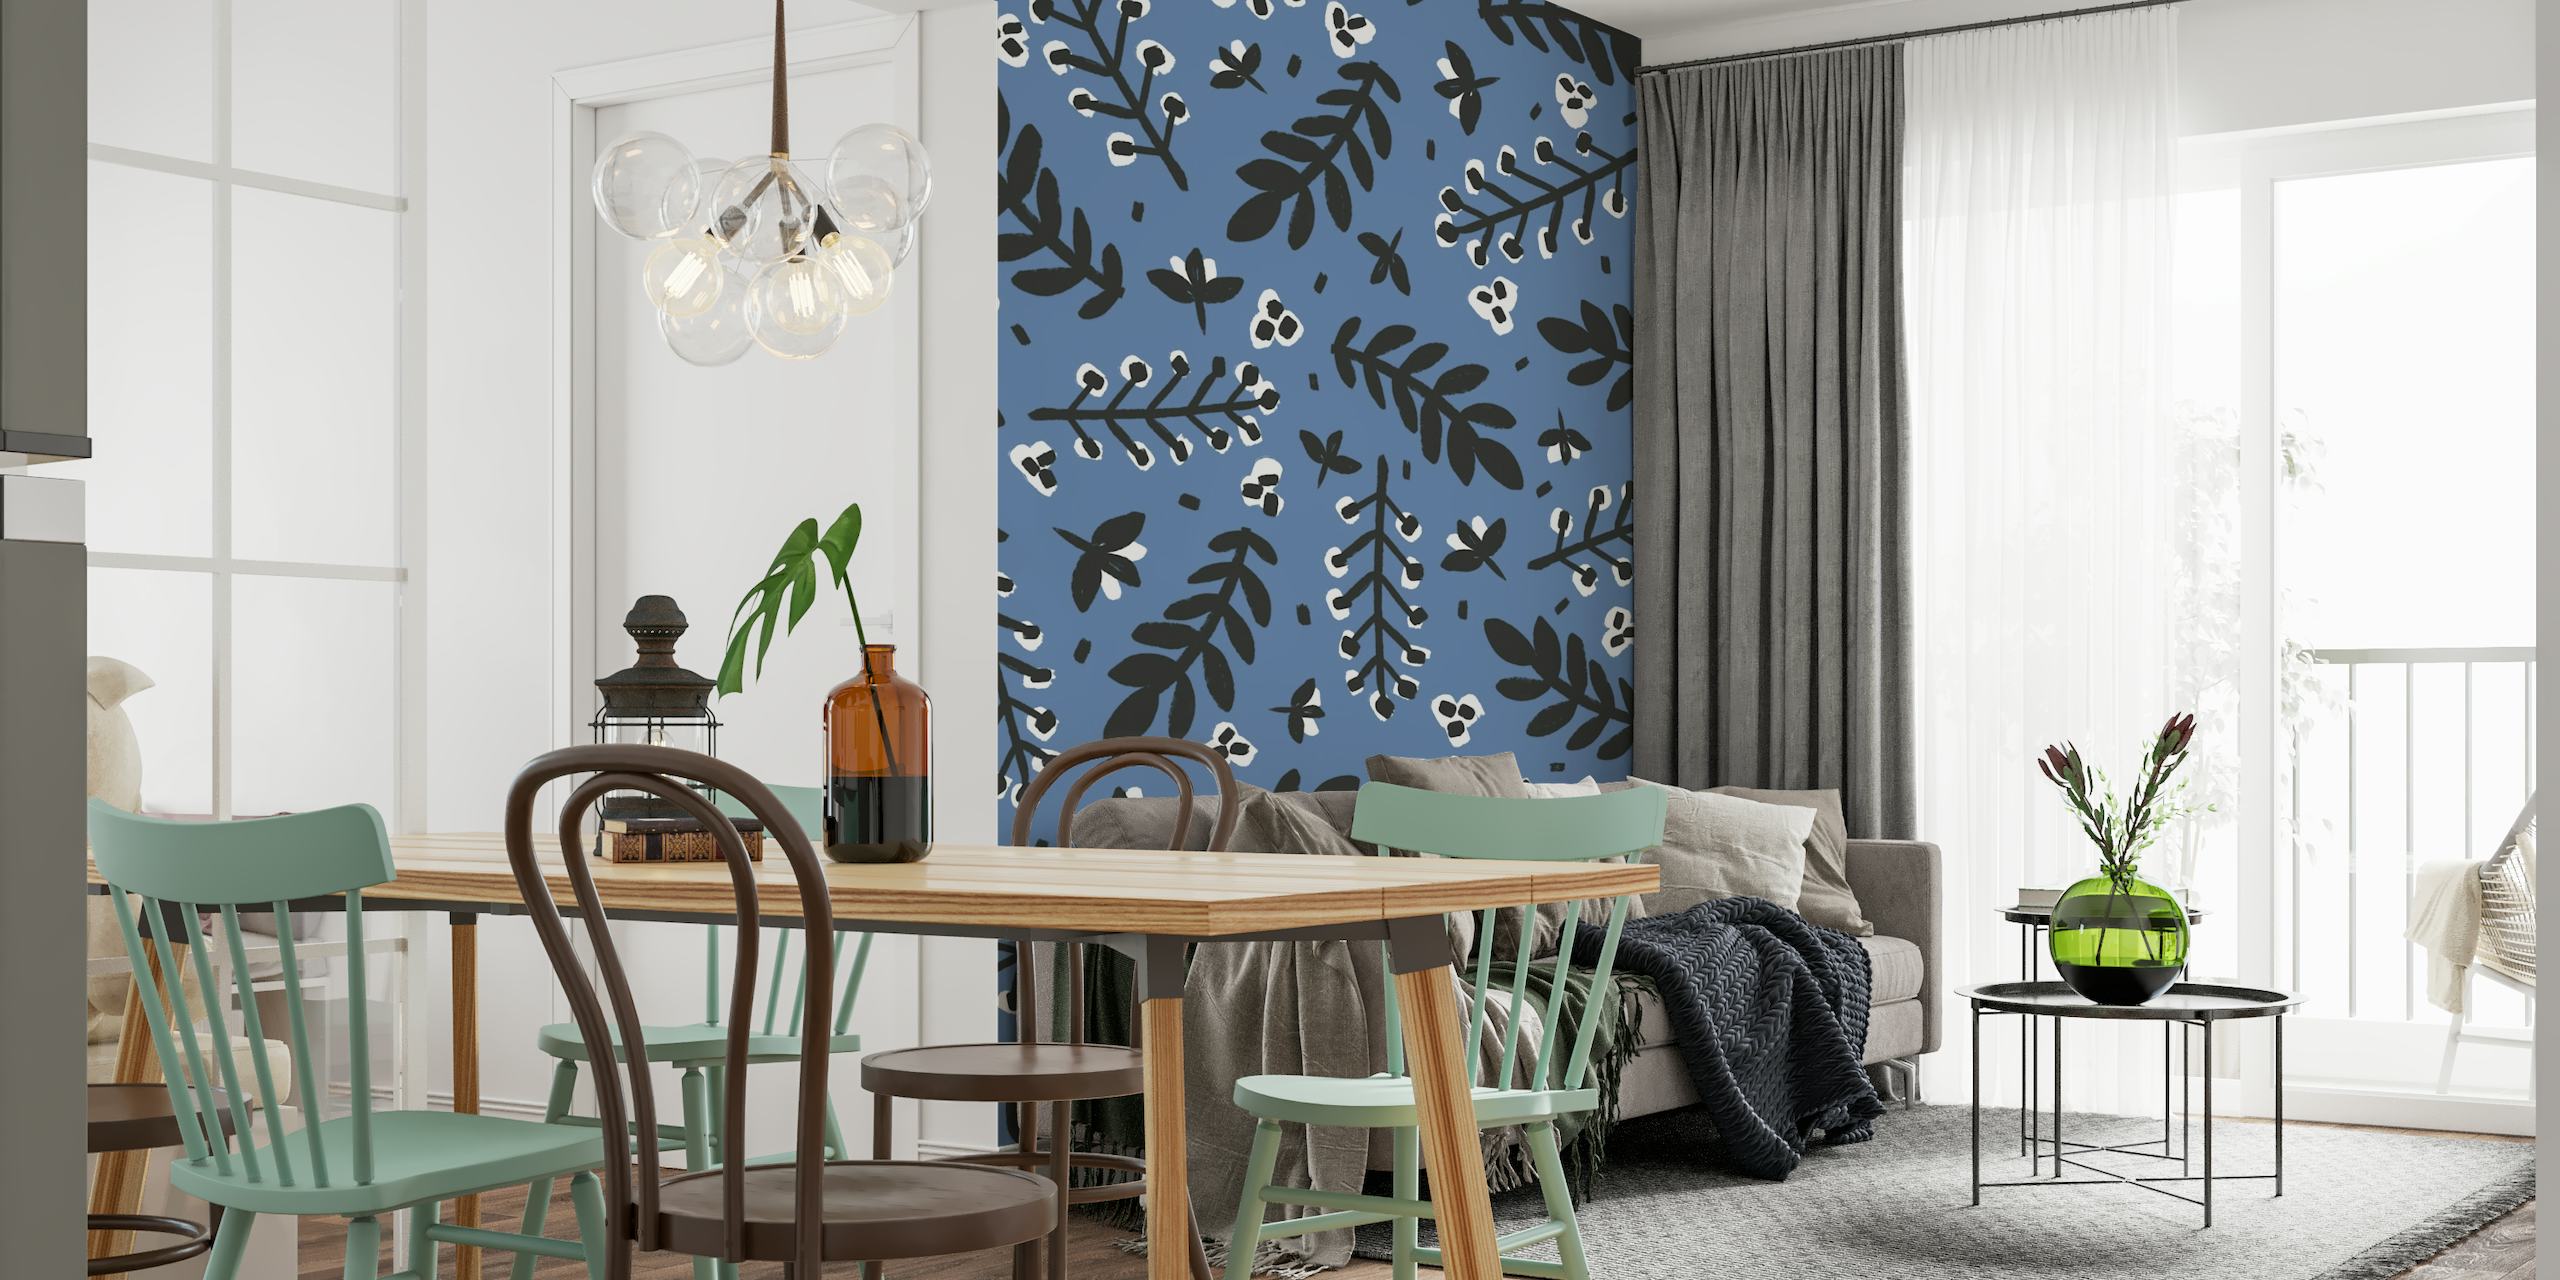 Blue wall mural with black and white branches and berries pattern